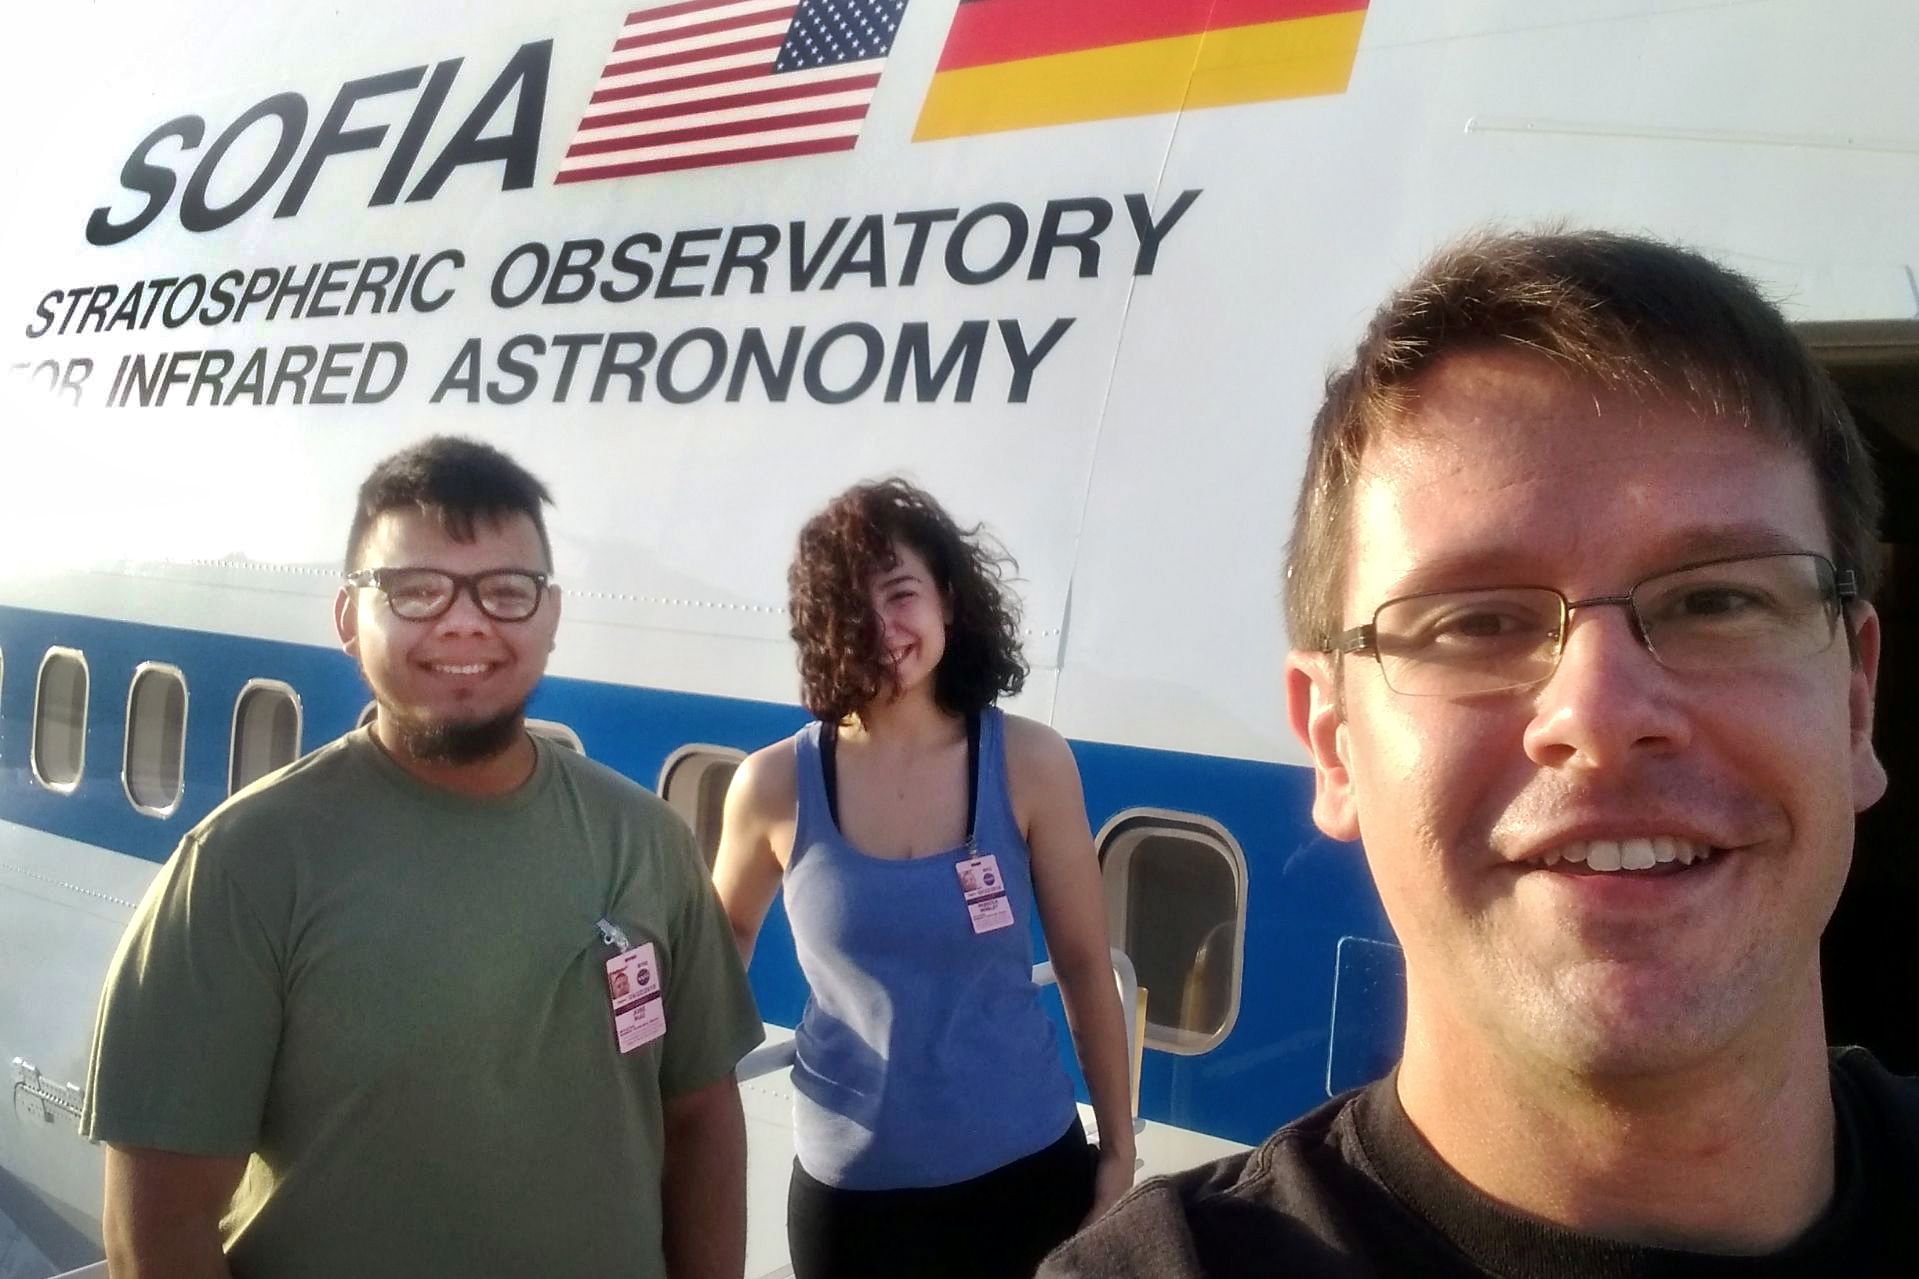 Aleksandar Diamond-Stanic, assistant professor of physics, snaps a selfie with his students, Jose Ruiz ’19 and Becca Minsley ’20, in front of SOFIA, the world's largest airborne observatory.